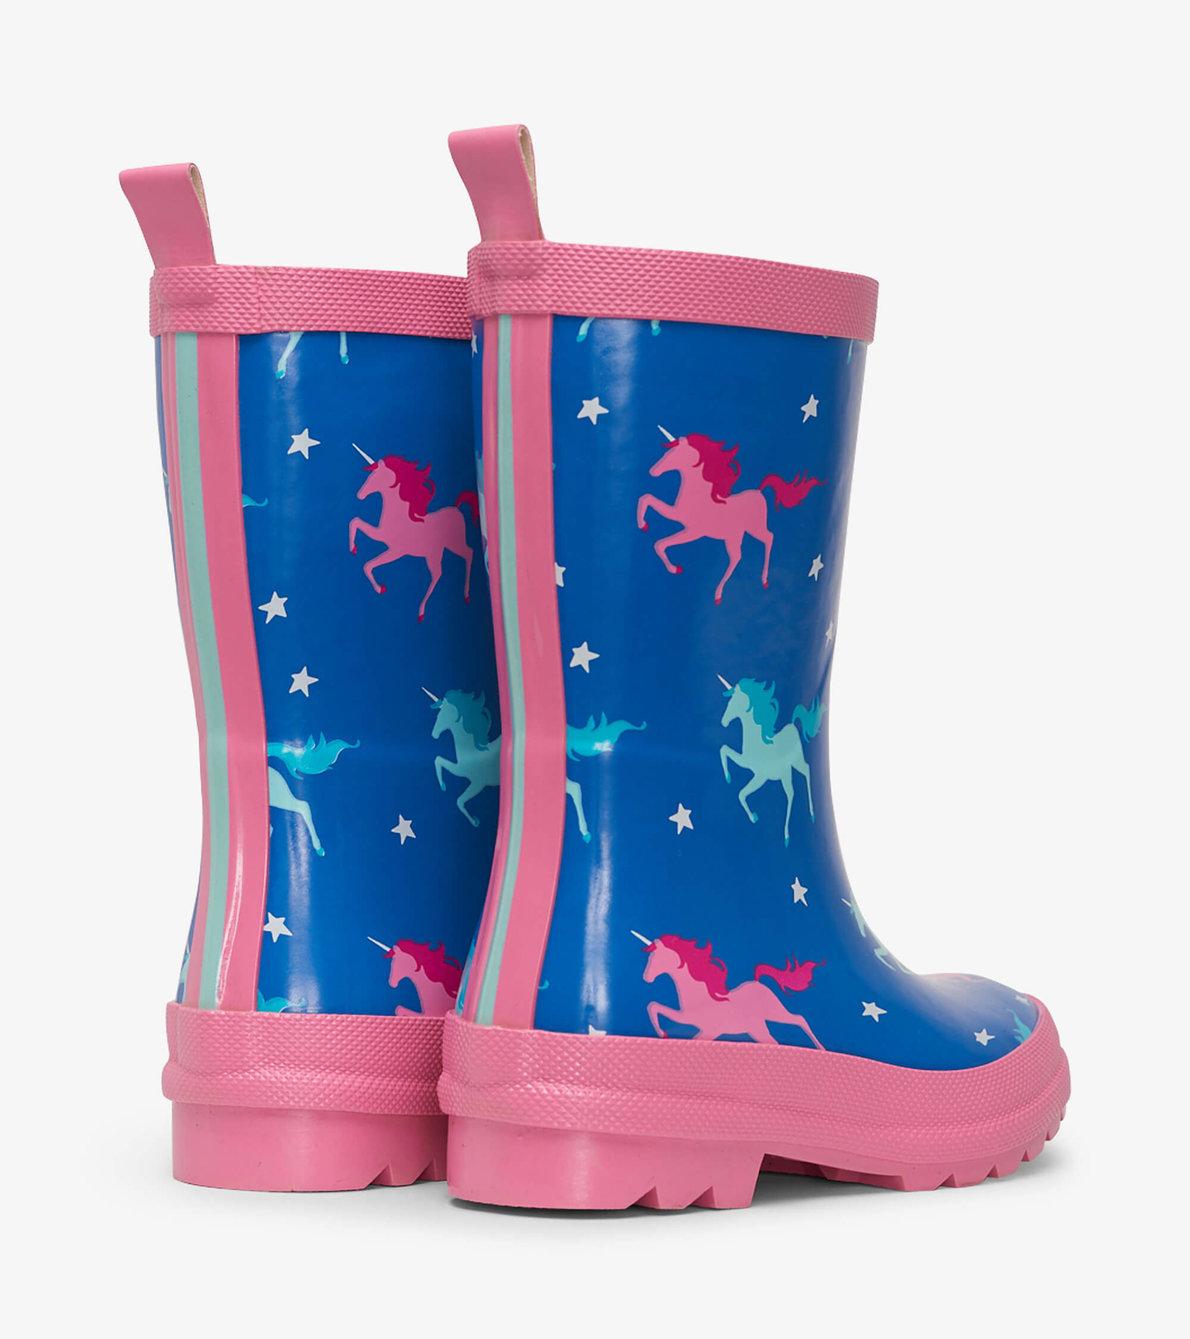 View larger image of Twinkle Unicorns Shiny Wellies